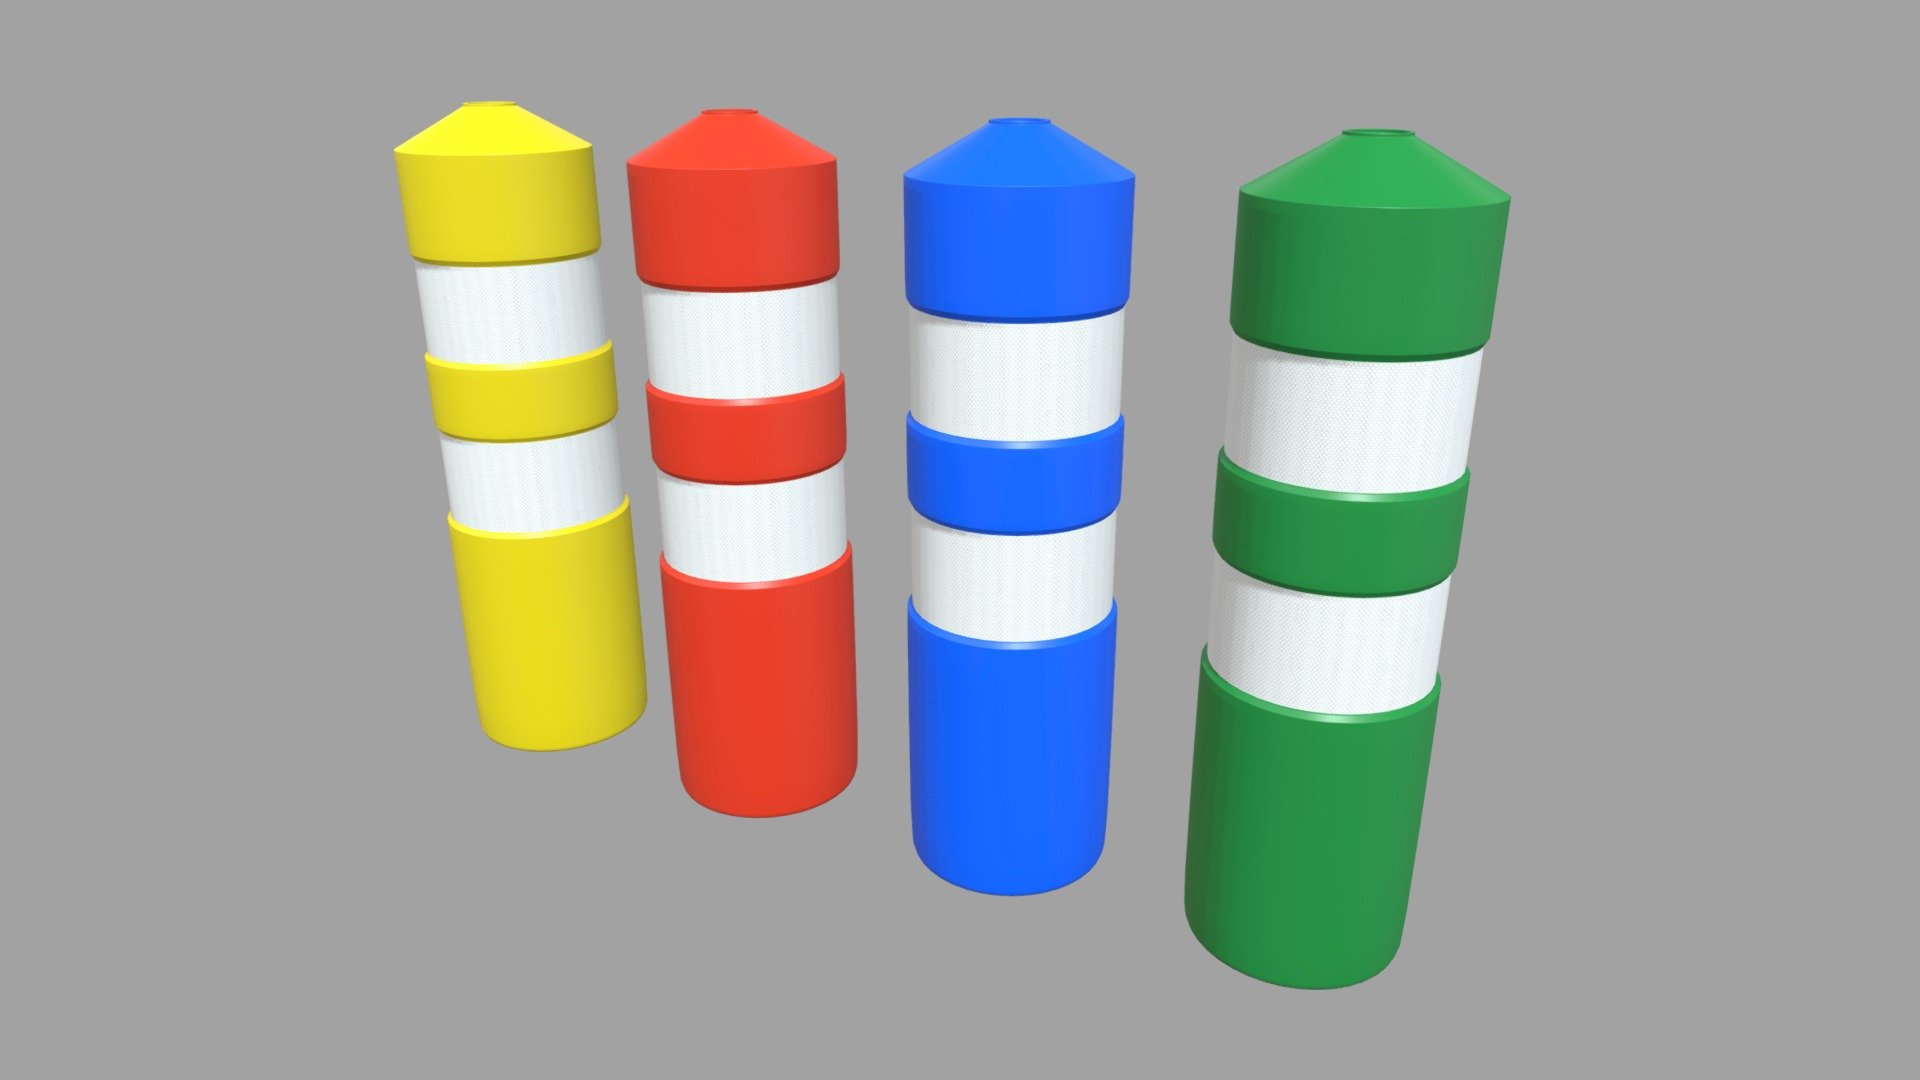 This model contains a Bollards 01 based on real plastic bollards which i modeled in Maya 2018 and texturized in Substance Painter.

The 4 bollards will have textures, fbx, obj, mb, dae, blend and substance file, all in one unique UV.

These models will be part of a huge city elements pack which will be added as a big pack and separately on my profile.

If you need any kind of help contact me, i will help you with everything i can. If you like the model please give me some feedback, I would appreciate it.

Don’t doubt on contacting me, i would be very happy to help. If you experience any kind of difficulties, be sure to contact me and i will help you. Sincerely Yours, ViperJr3D - Bollards 01 - Buy Royalty Free 3D model by ViperJr3D 3d model